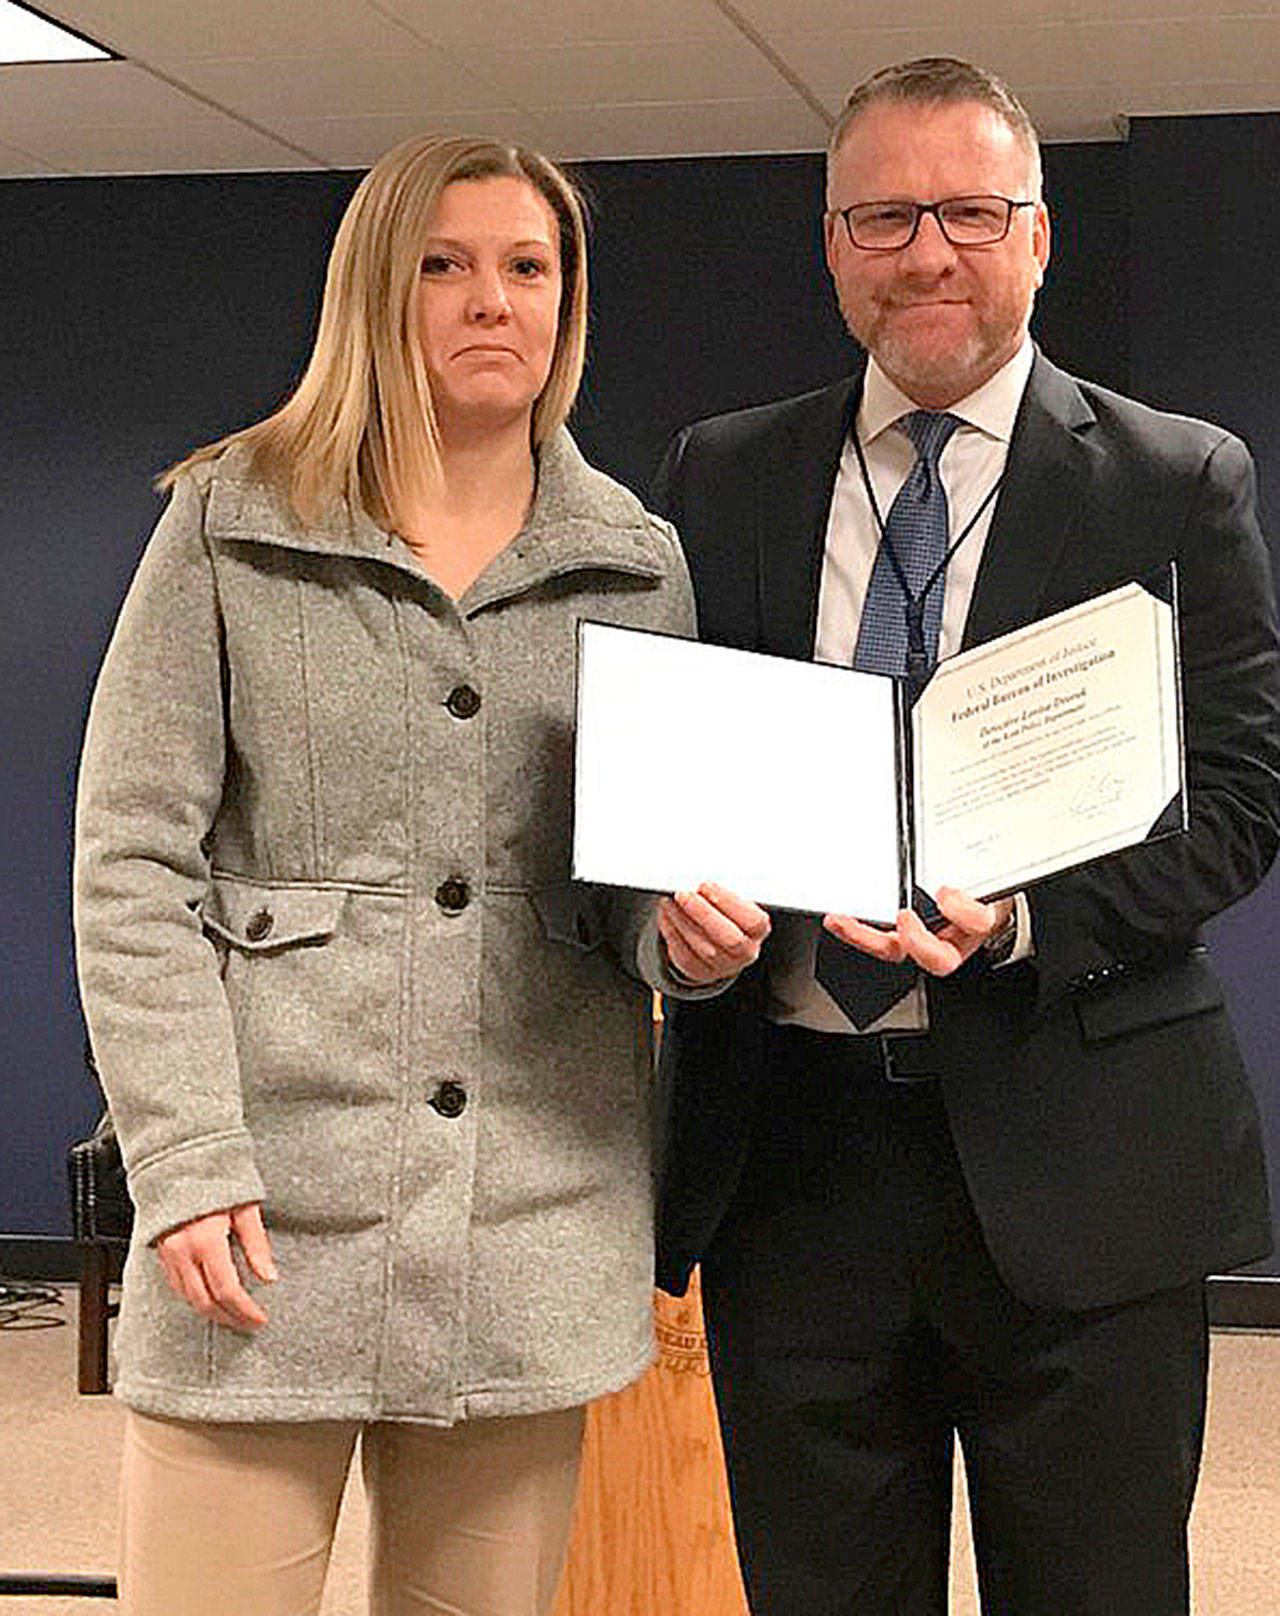 Kent Police Detective Lovisa Dvorak, left, receives an award of appreciation Tuesday from Special Agent in Charge Jay S. Tabb Jr. at the FBI office in Seattle for her contributions to the joint task force on Child Exploitation regarding Human Trafficking. COURTESY PHOTO, Kent Police